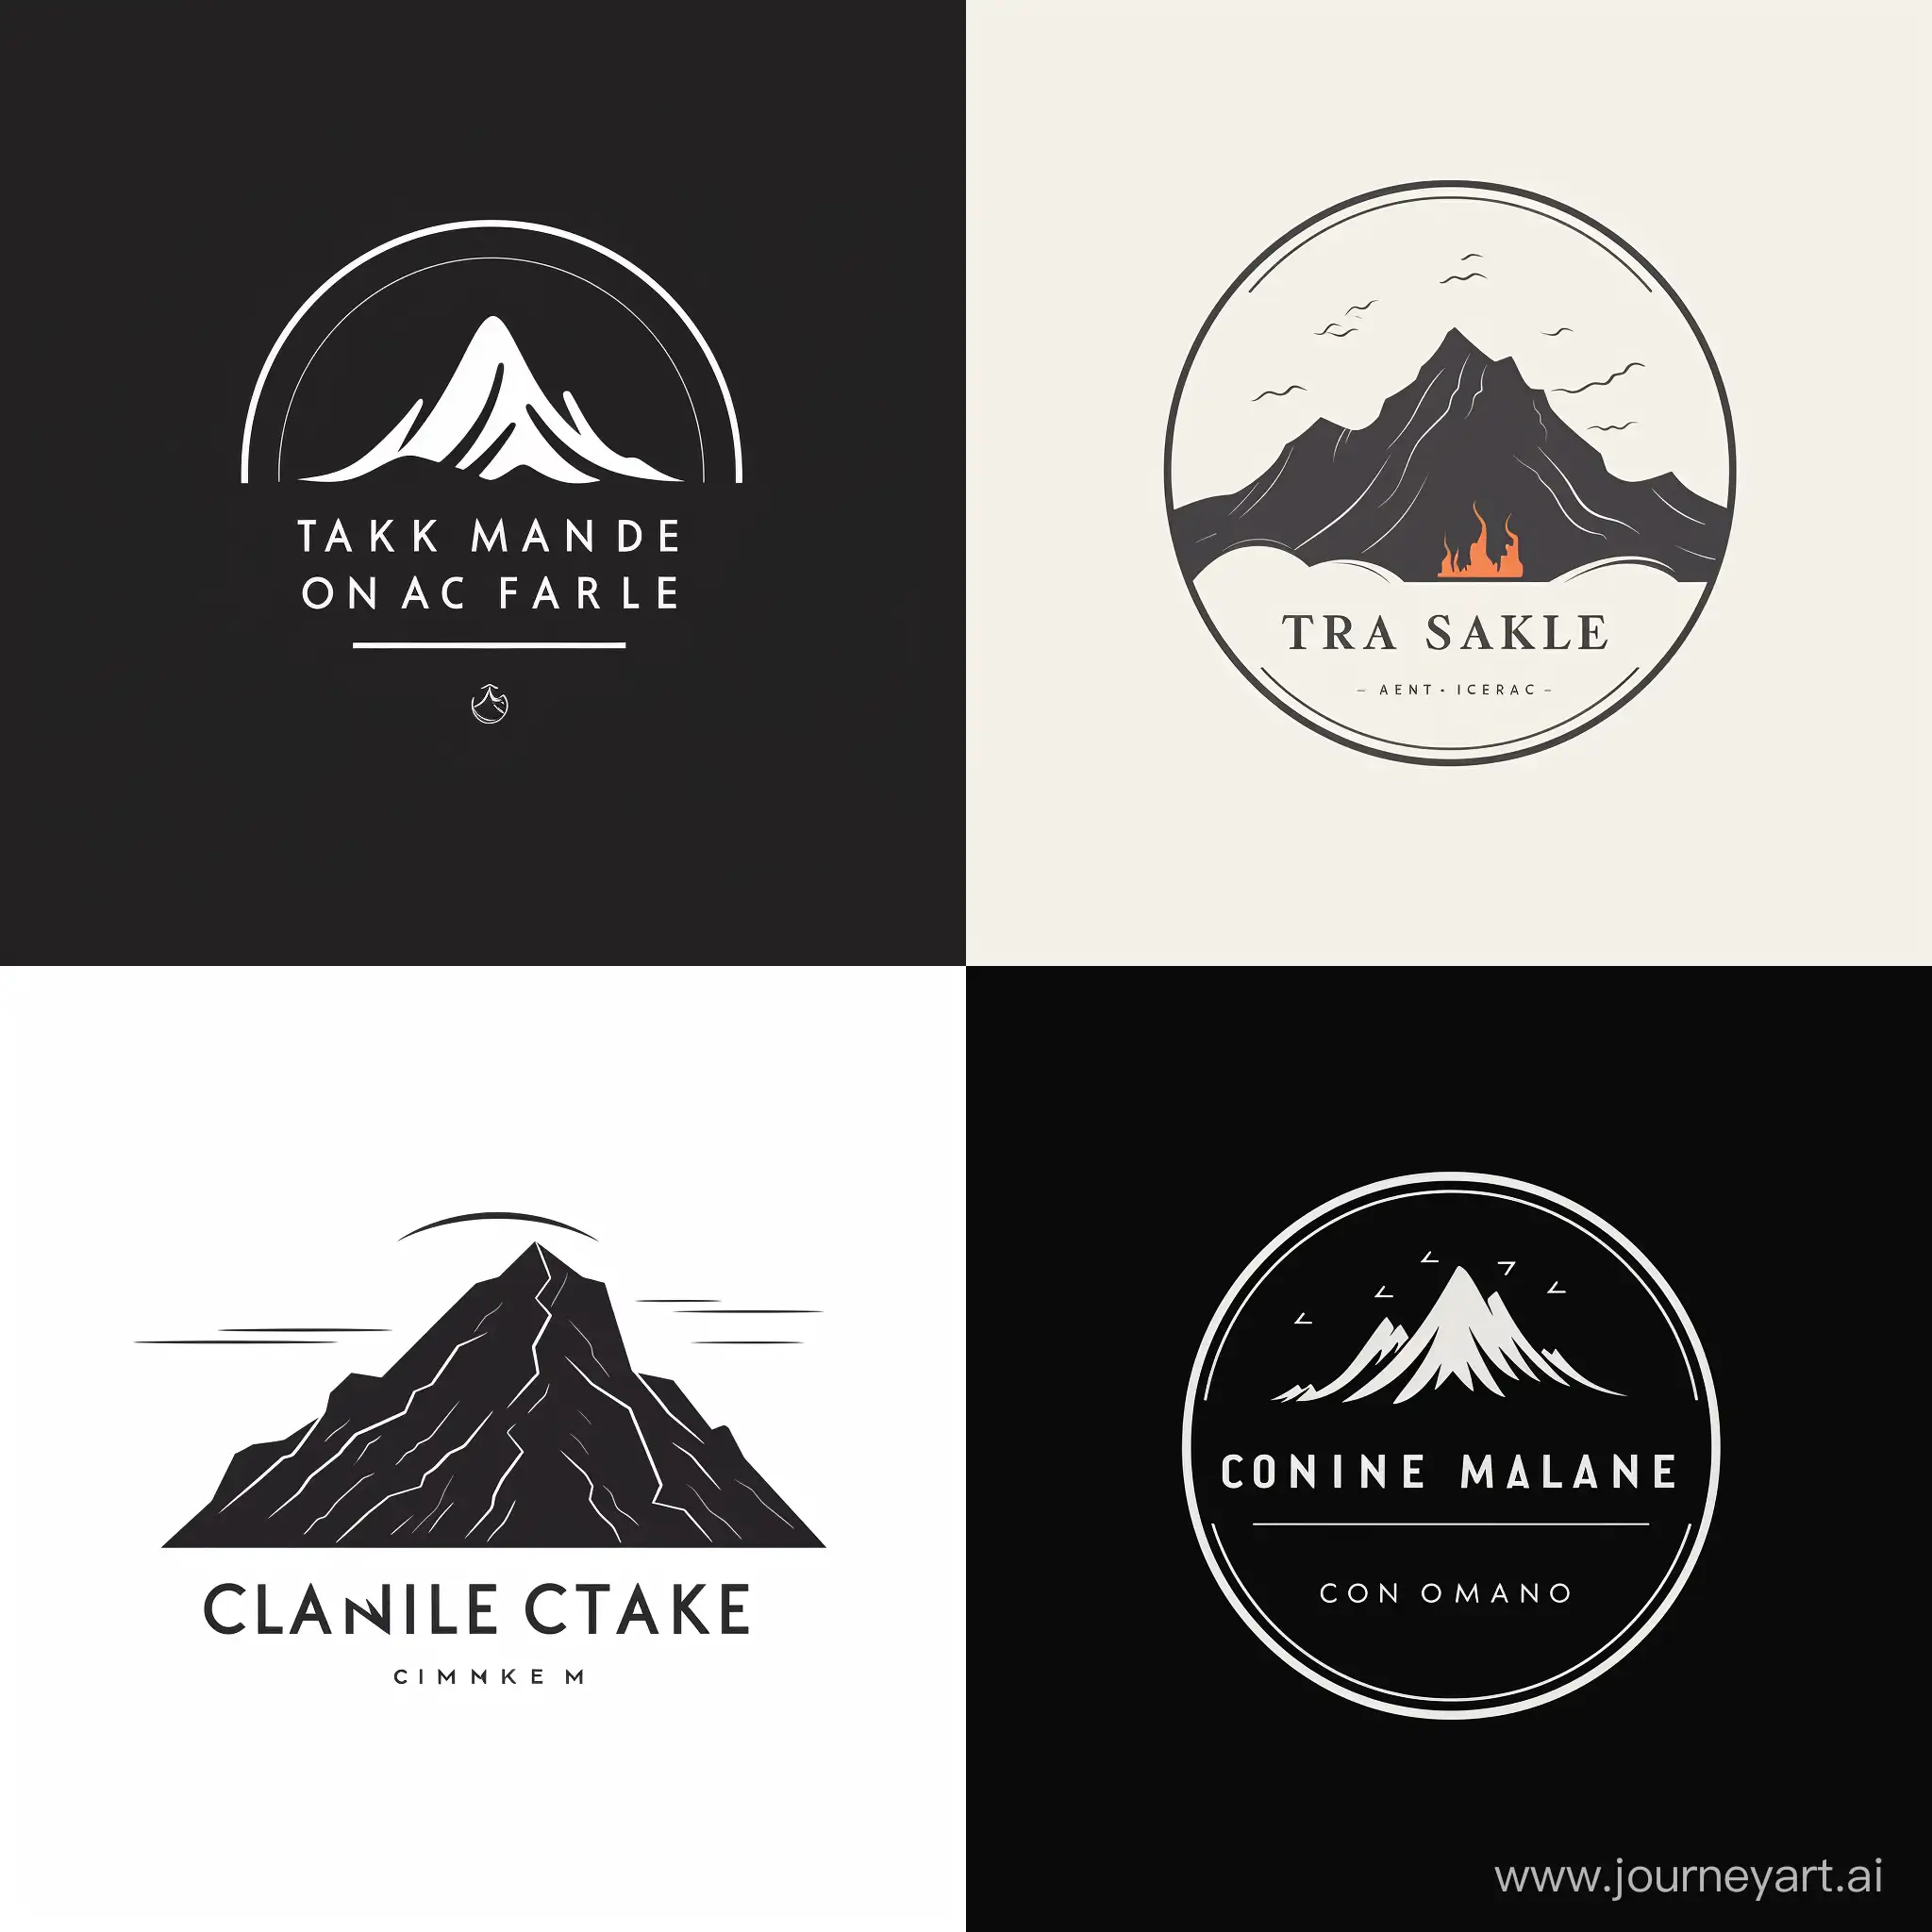 line art logo, minimal, mountain, a cafe in the bottom of the mountains. Let the smoke come out of the chimney of the cafe. logo should be black and white, but the smoke and the cafe should be some other colors